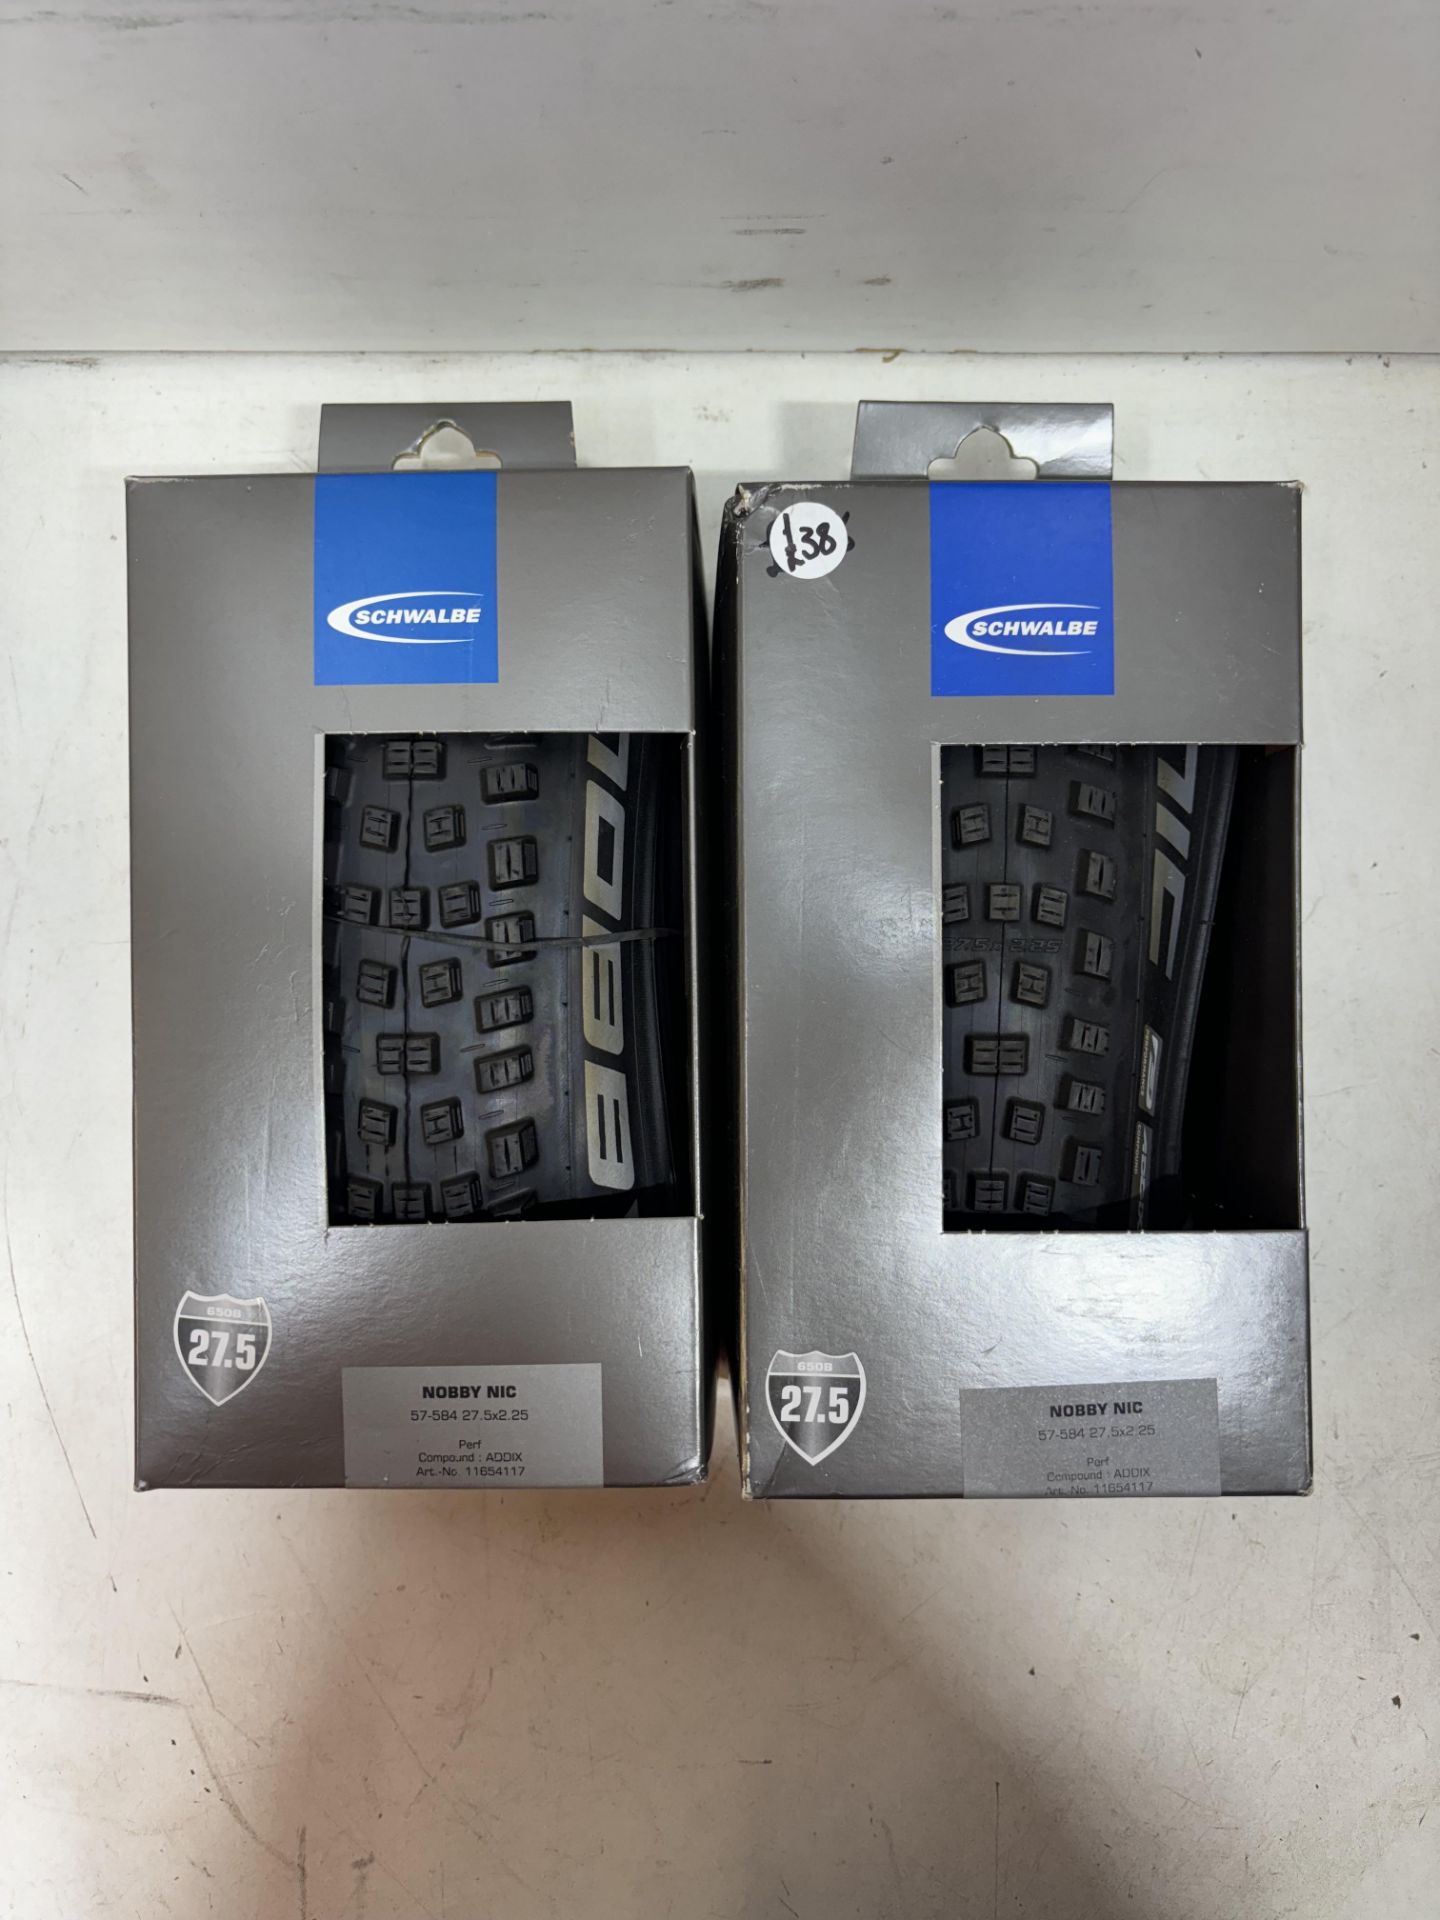 2 x Schwalbe Nobby Nic HS602 Fold 27.5x2.25" Performance Addix Tyres - Image 2 of 3